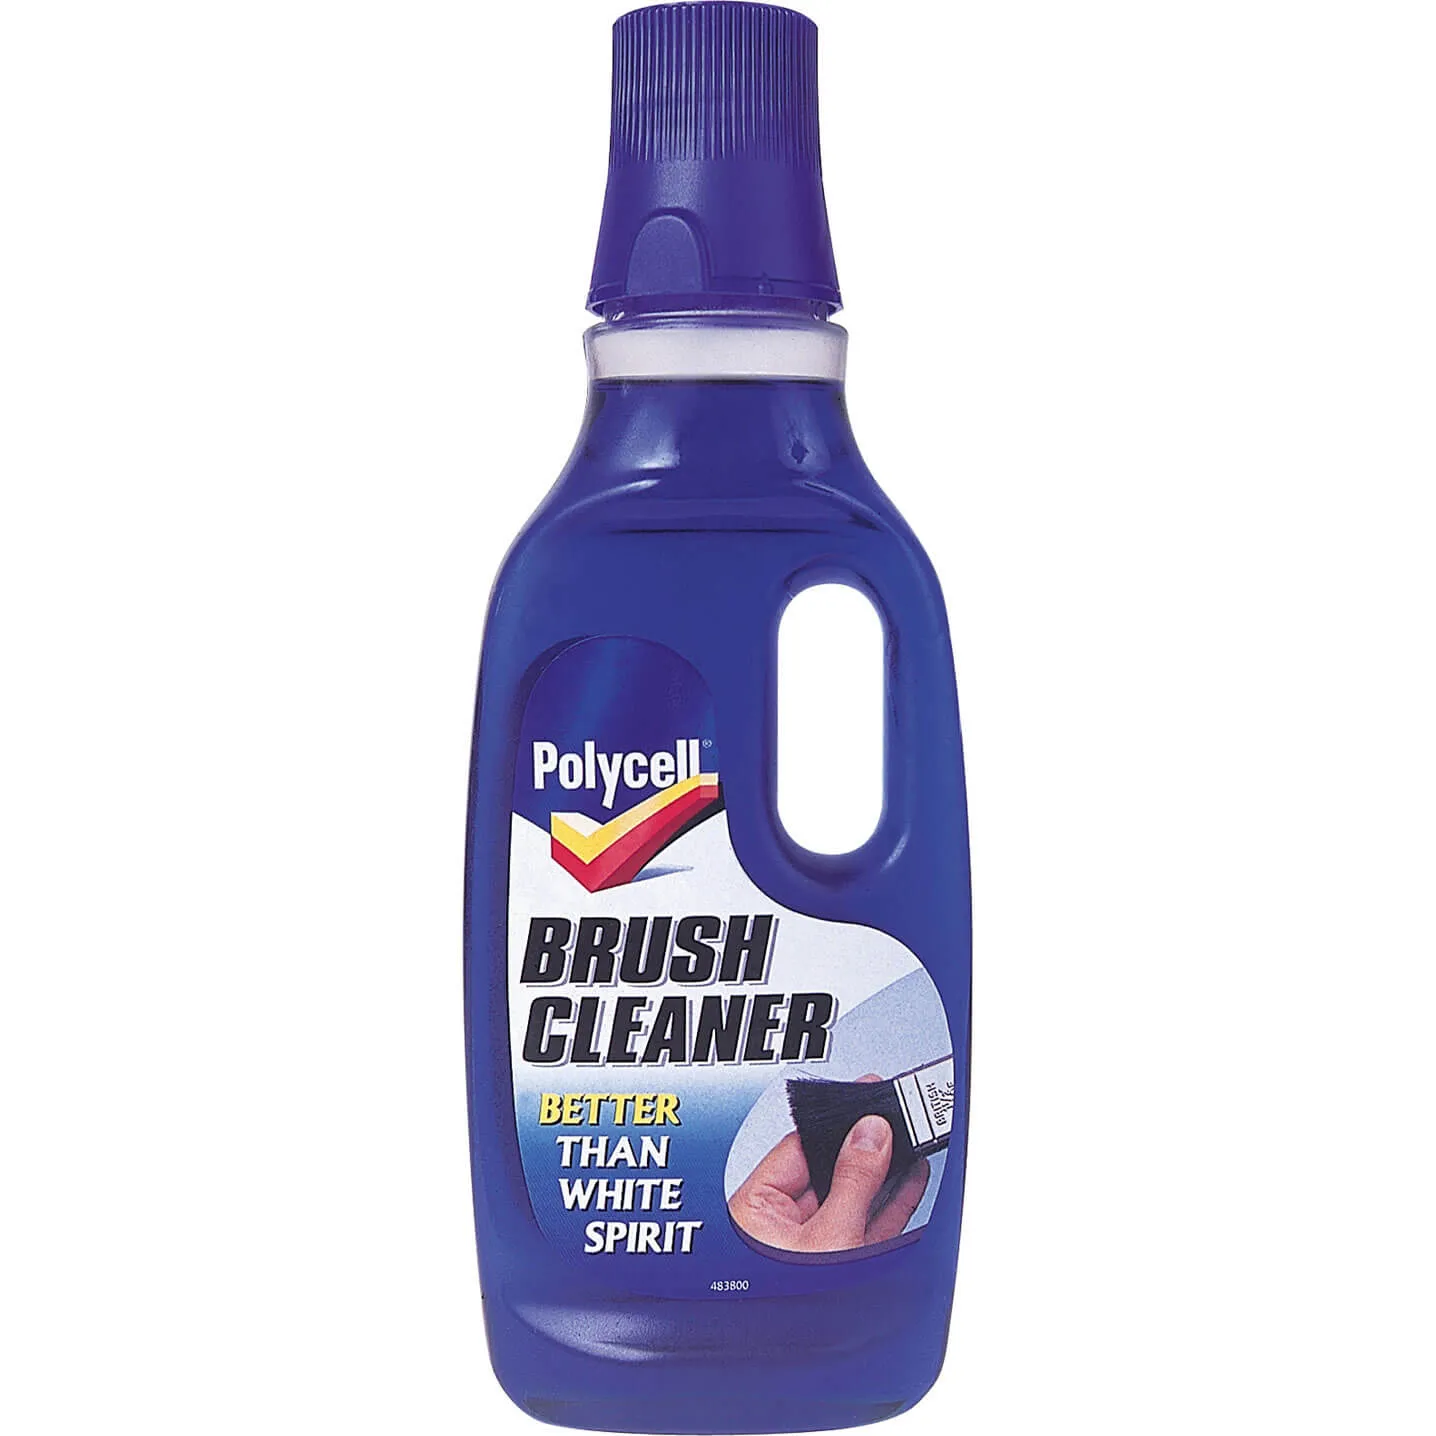 Polycell Brush Cleaner - 500ml